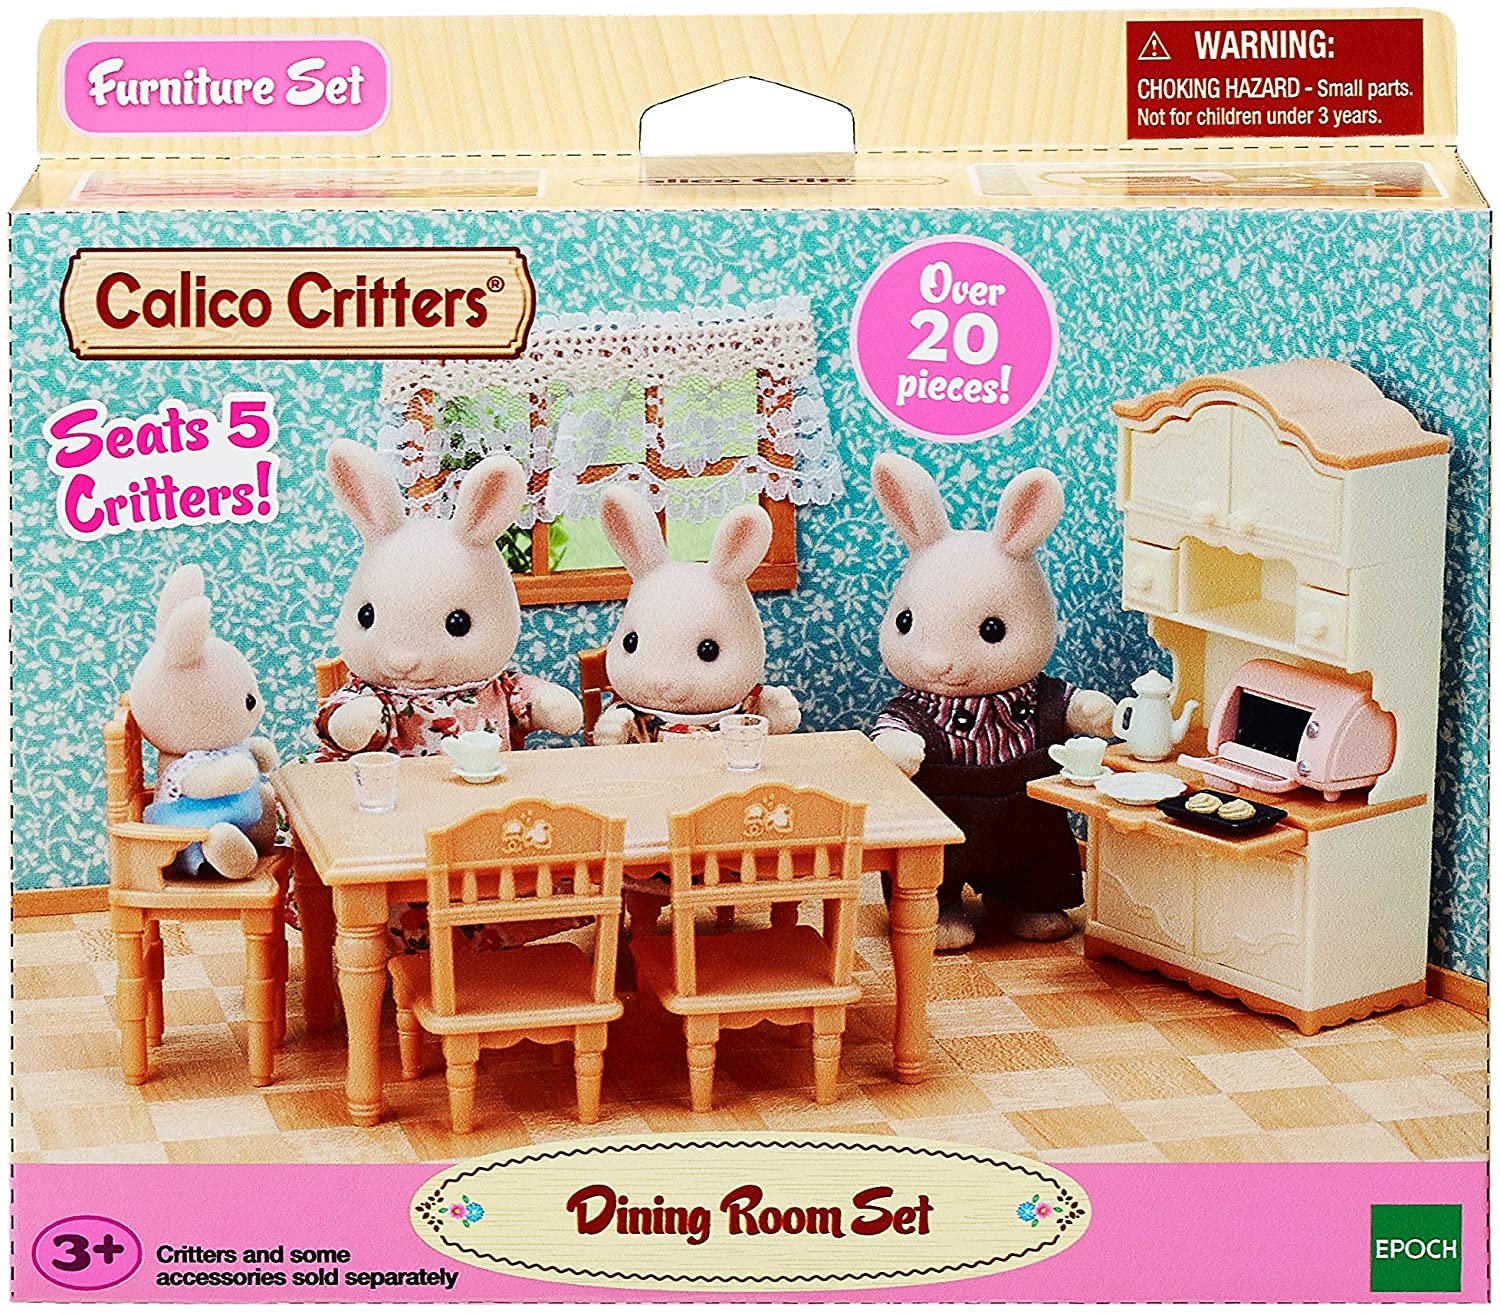 Sylvanian Families KA-612 Home Party Set Cake Present Dinner Calico Critters 